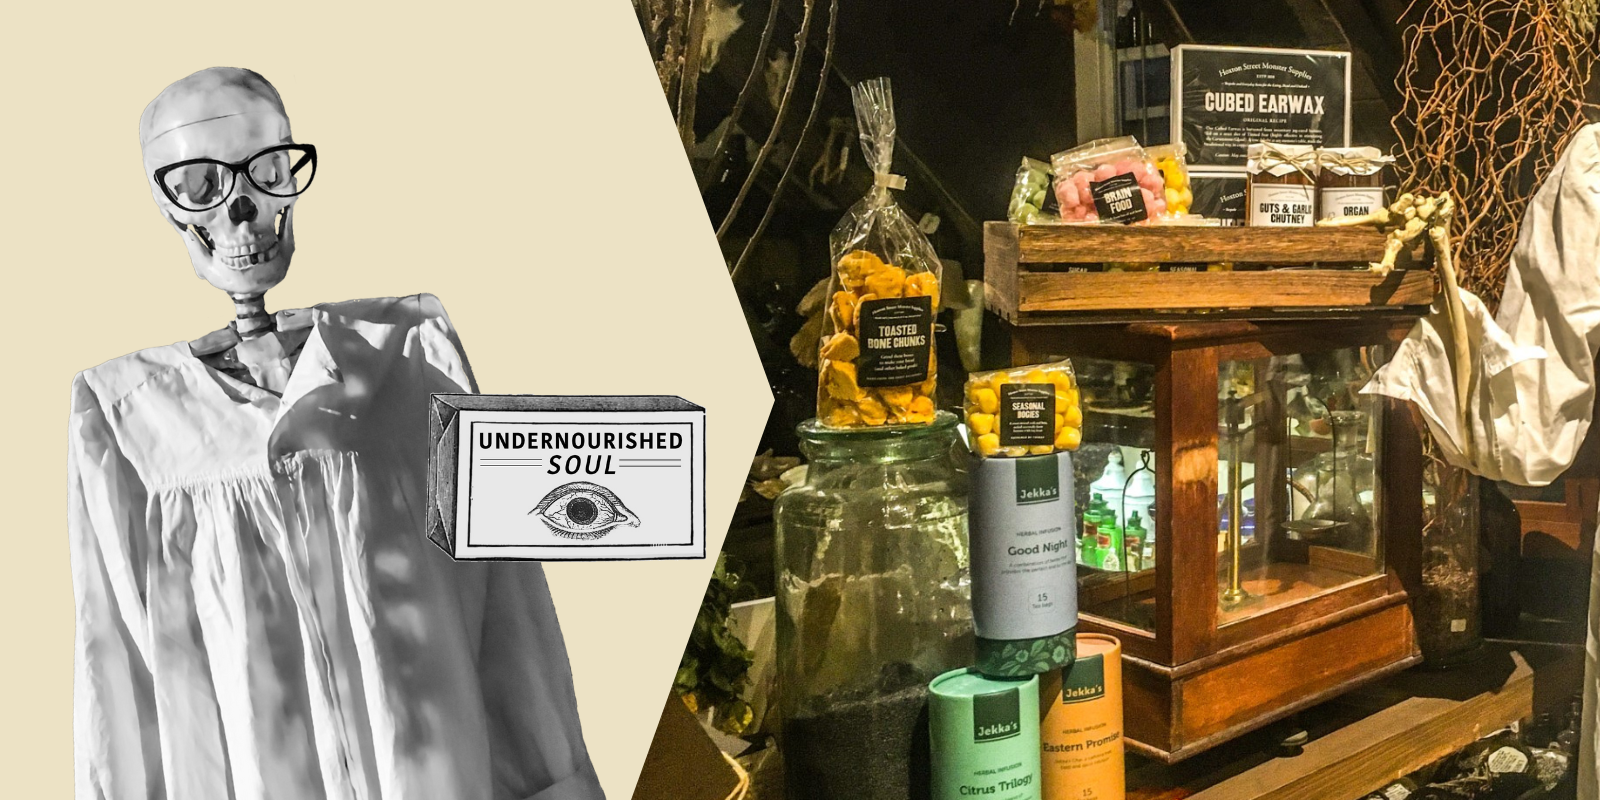 Left: a cut-out black-and-white photo of a skeleton wearing glasses and a gown, next to an illustrated box labelled Undernourished Soul. Right: a colour photo of tea, sweets and jam products displayed around museum objects